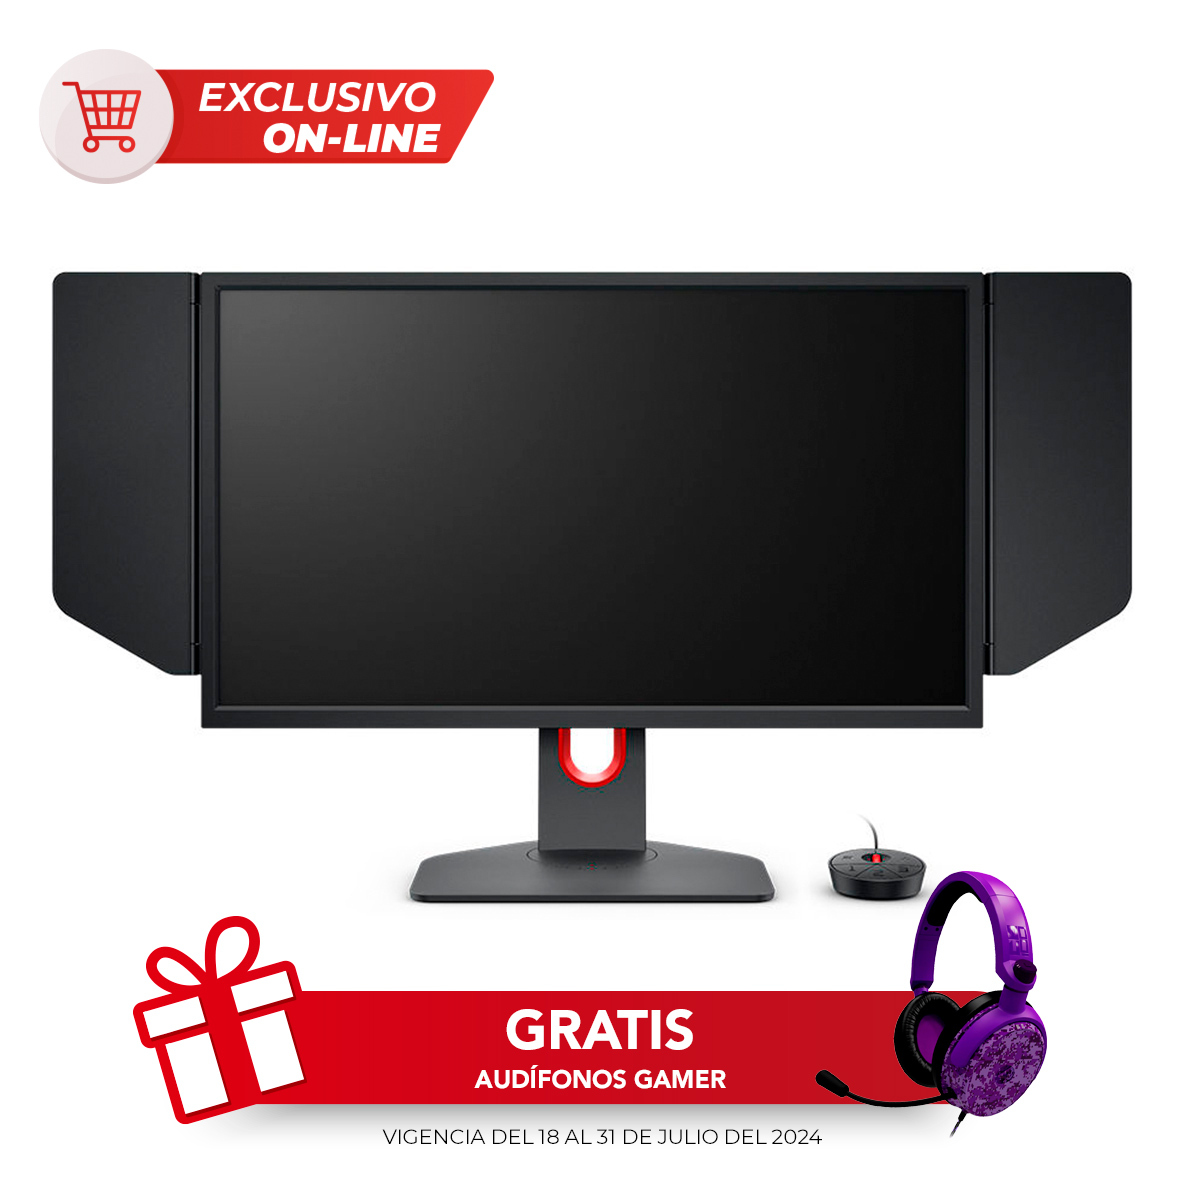 Monitor Gamer BenQ Zowie XL2566K 24.5 pulg. Led